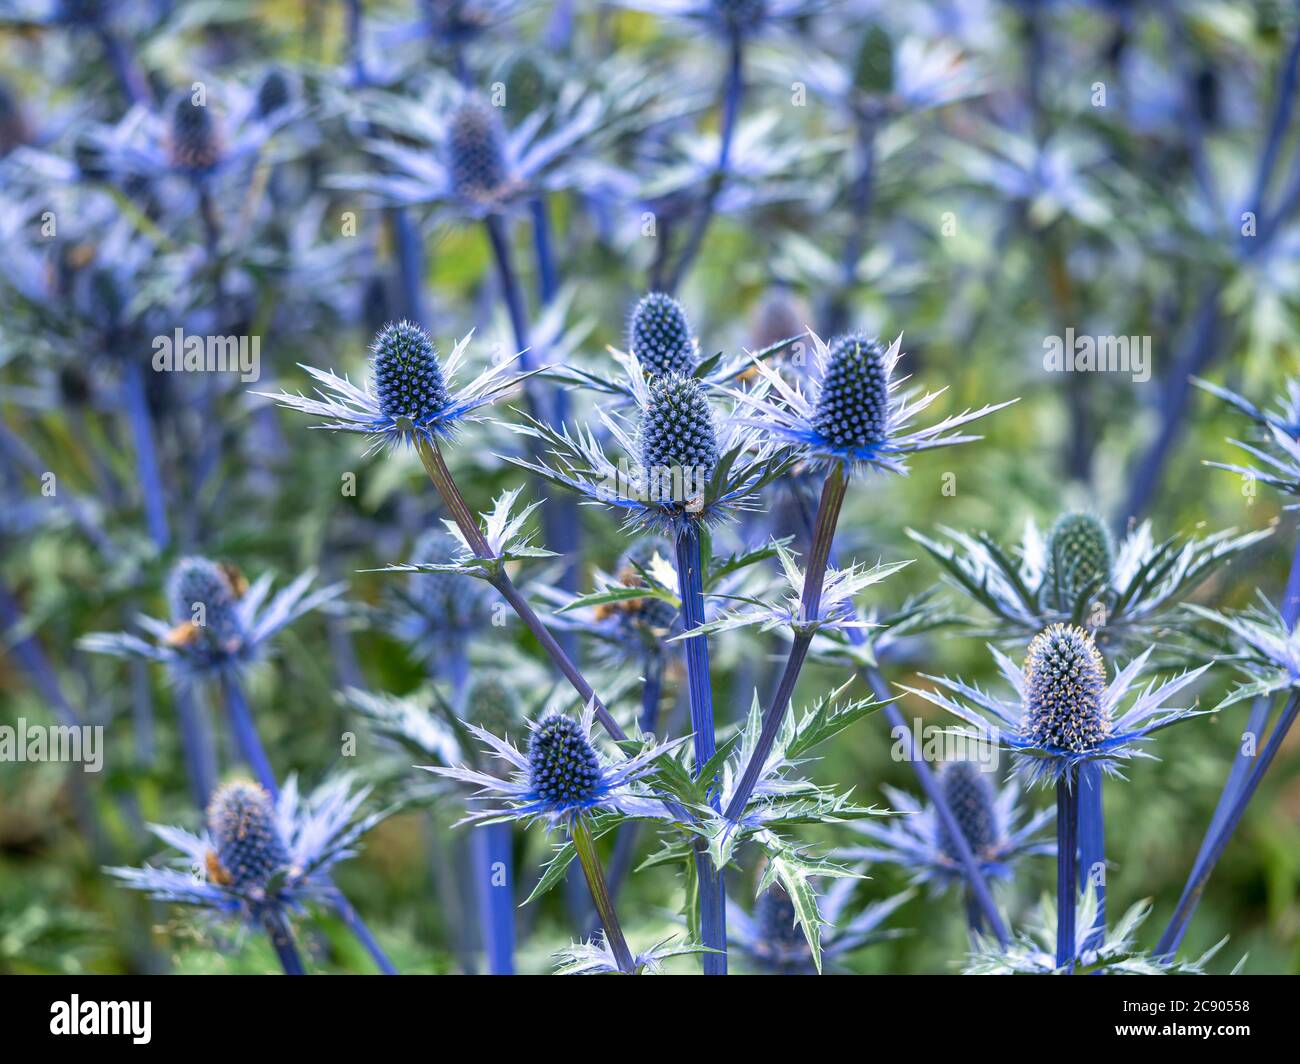 Flowers and bracts of sea holly, Eryngium x zabelii variety Big Blue Stock Photo